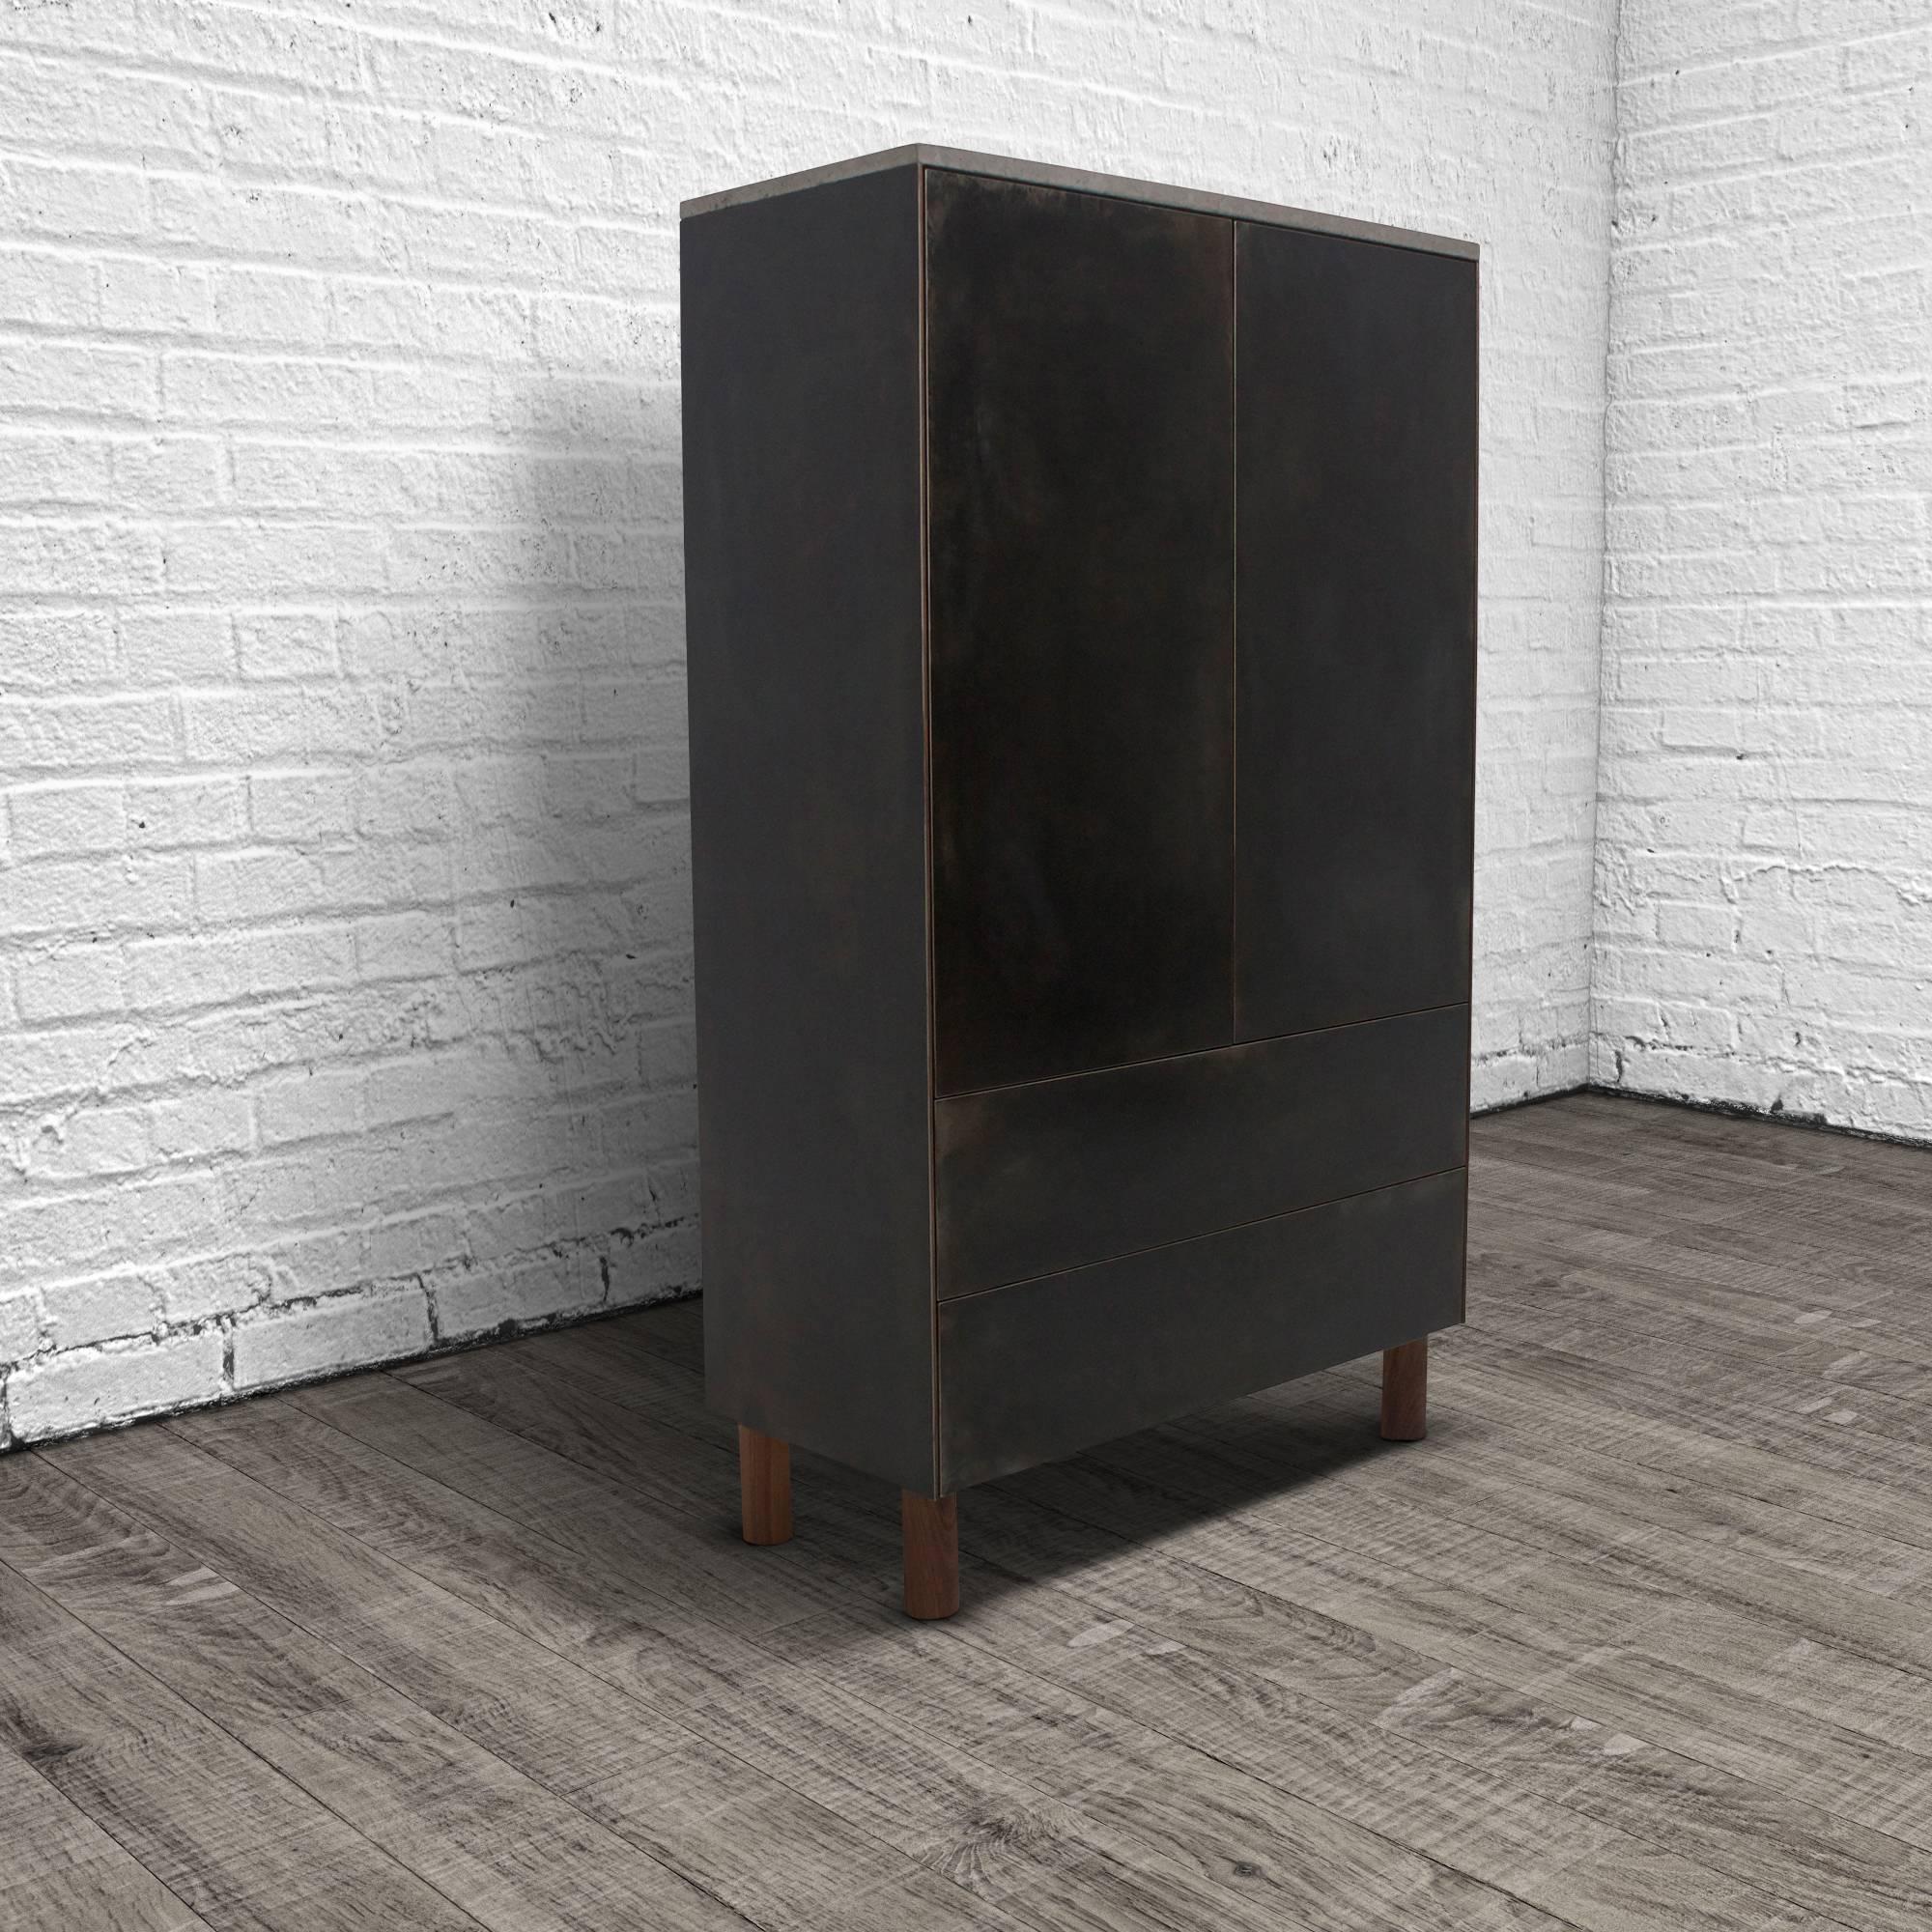 This cabinet combines three elemental materials, concrete, steel and wood to create a grounded, but elegant piece of furniture. The fascia is cold-rolled steel laminated to a walnut veneer core. The cabinet is topped with a cast-concrete slab.